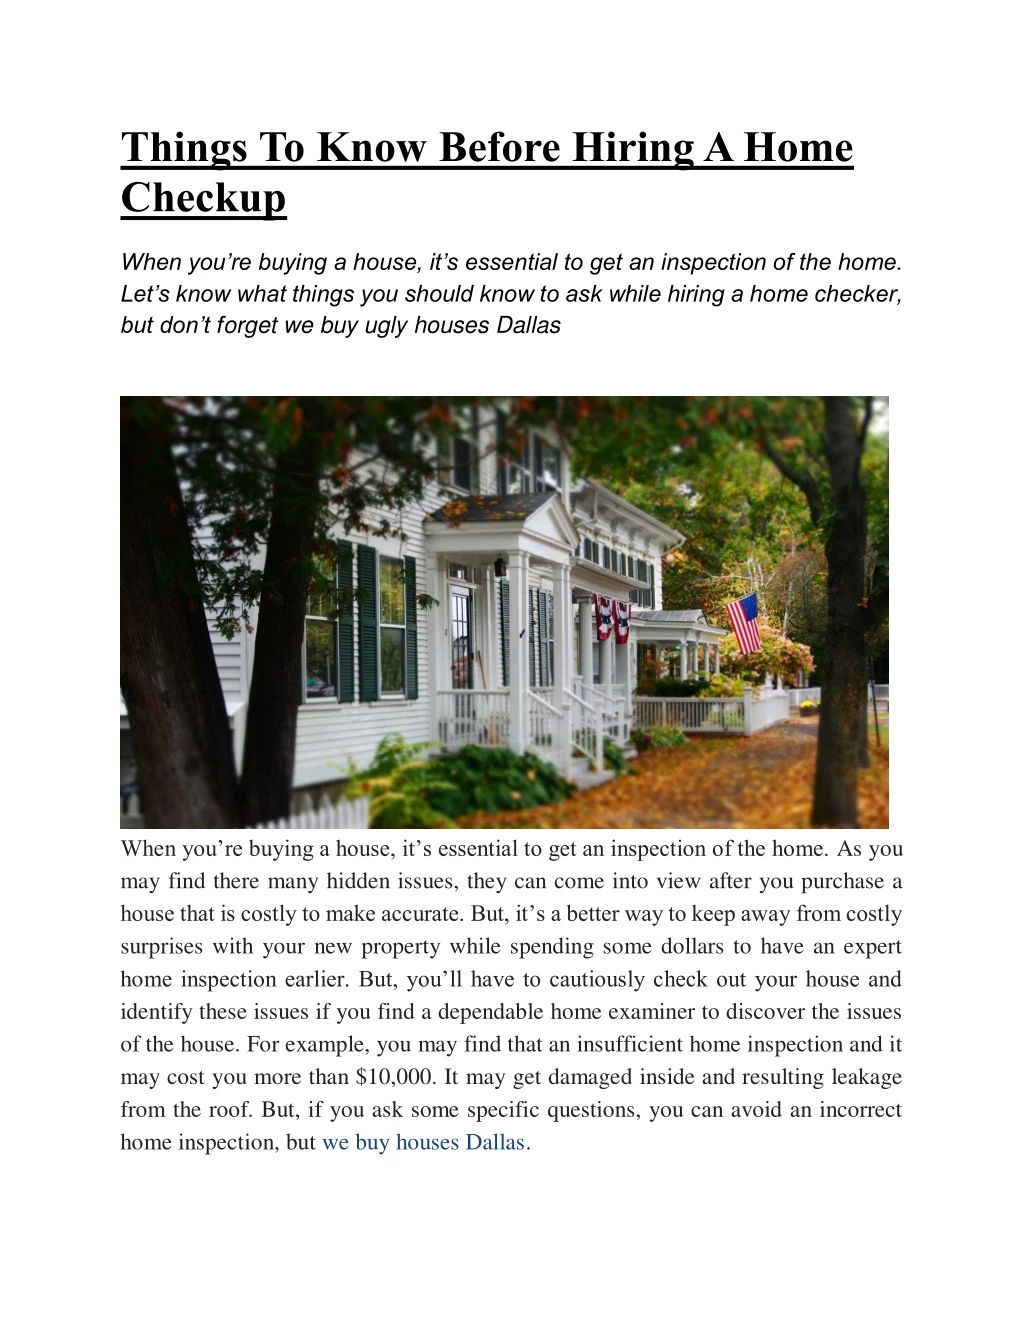 things to know before hiring a home checkup